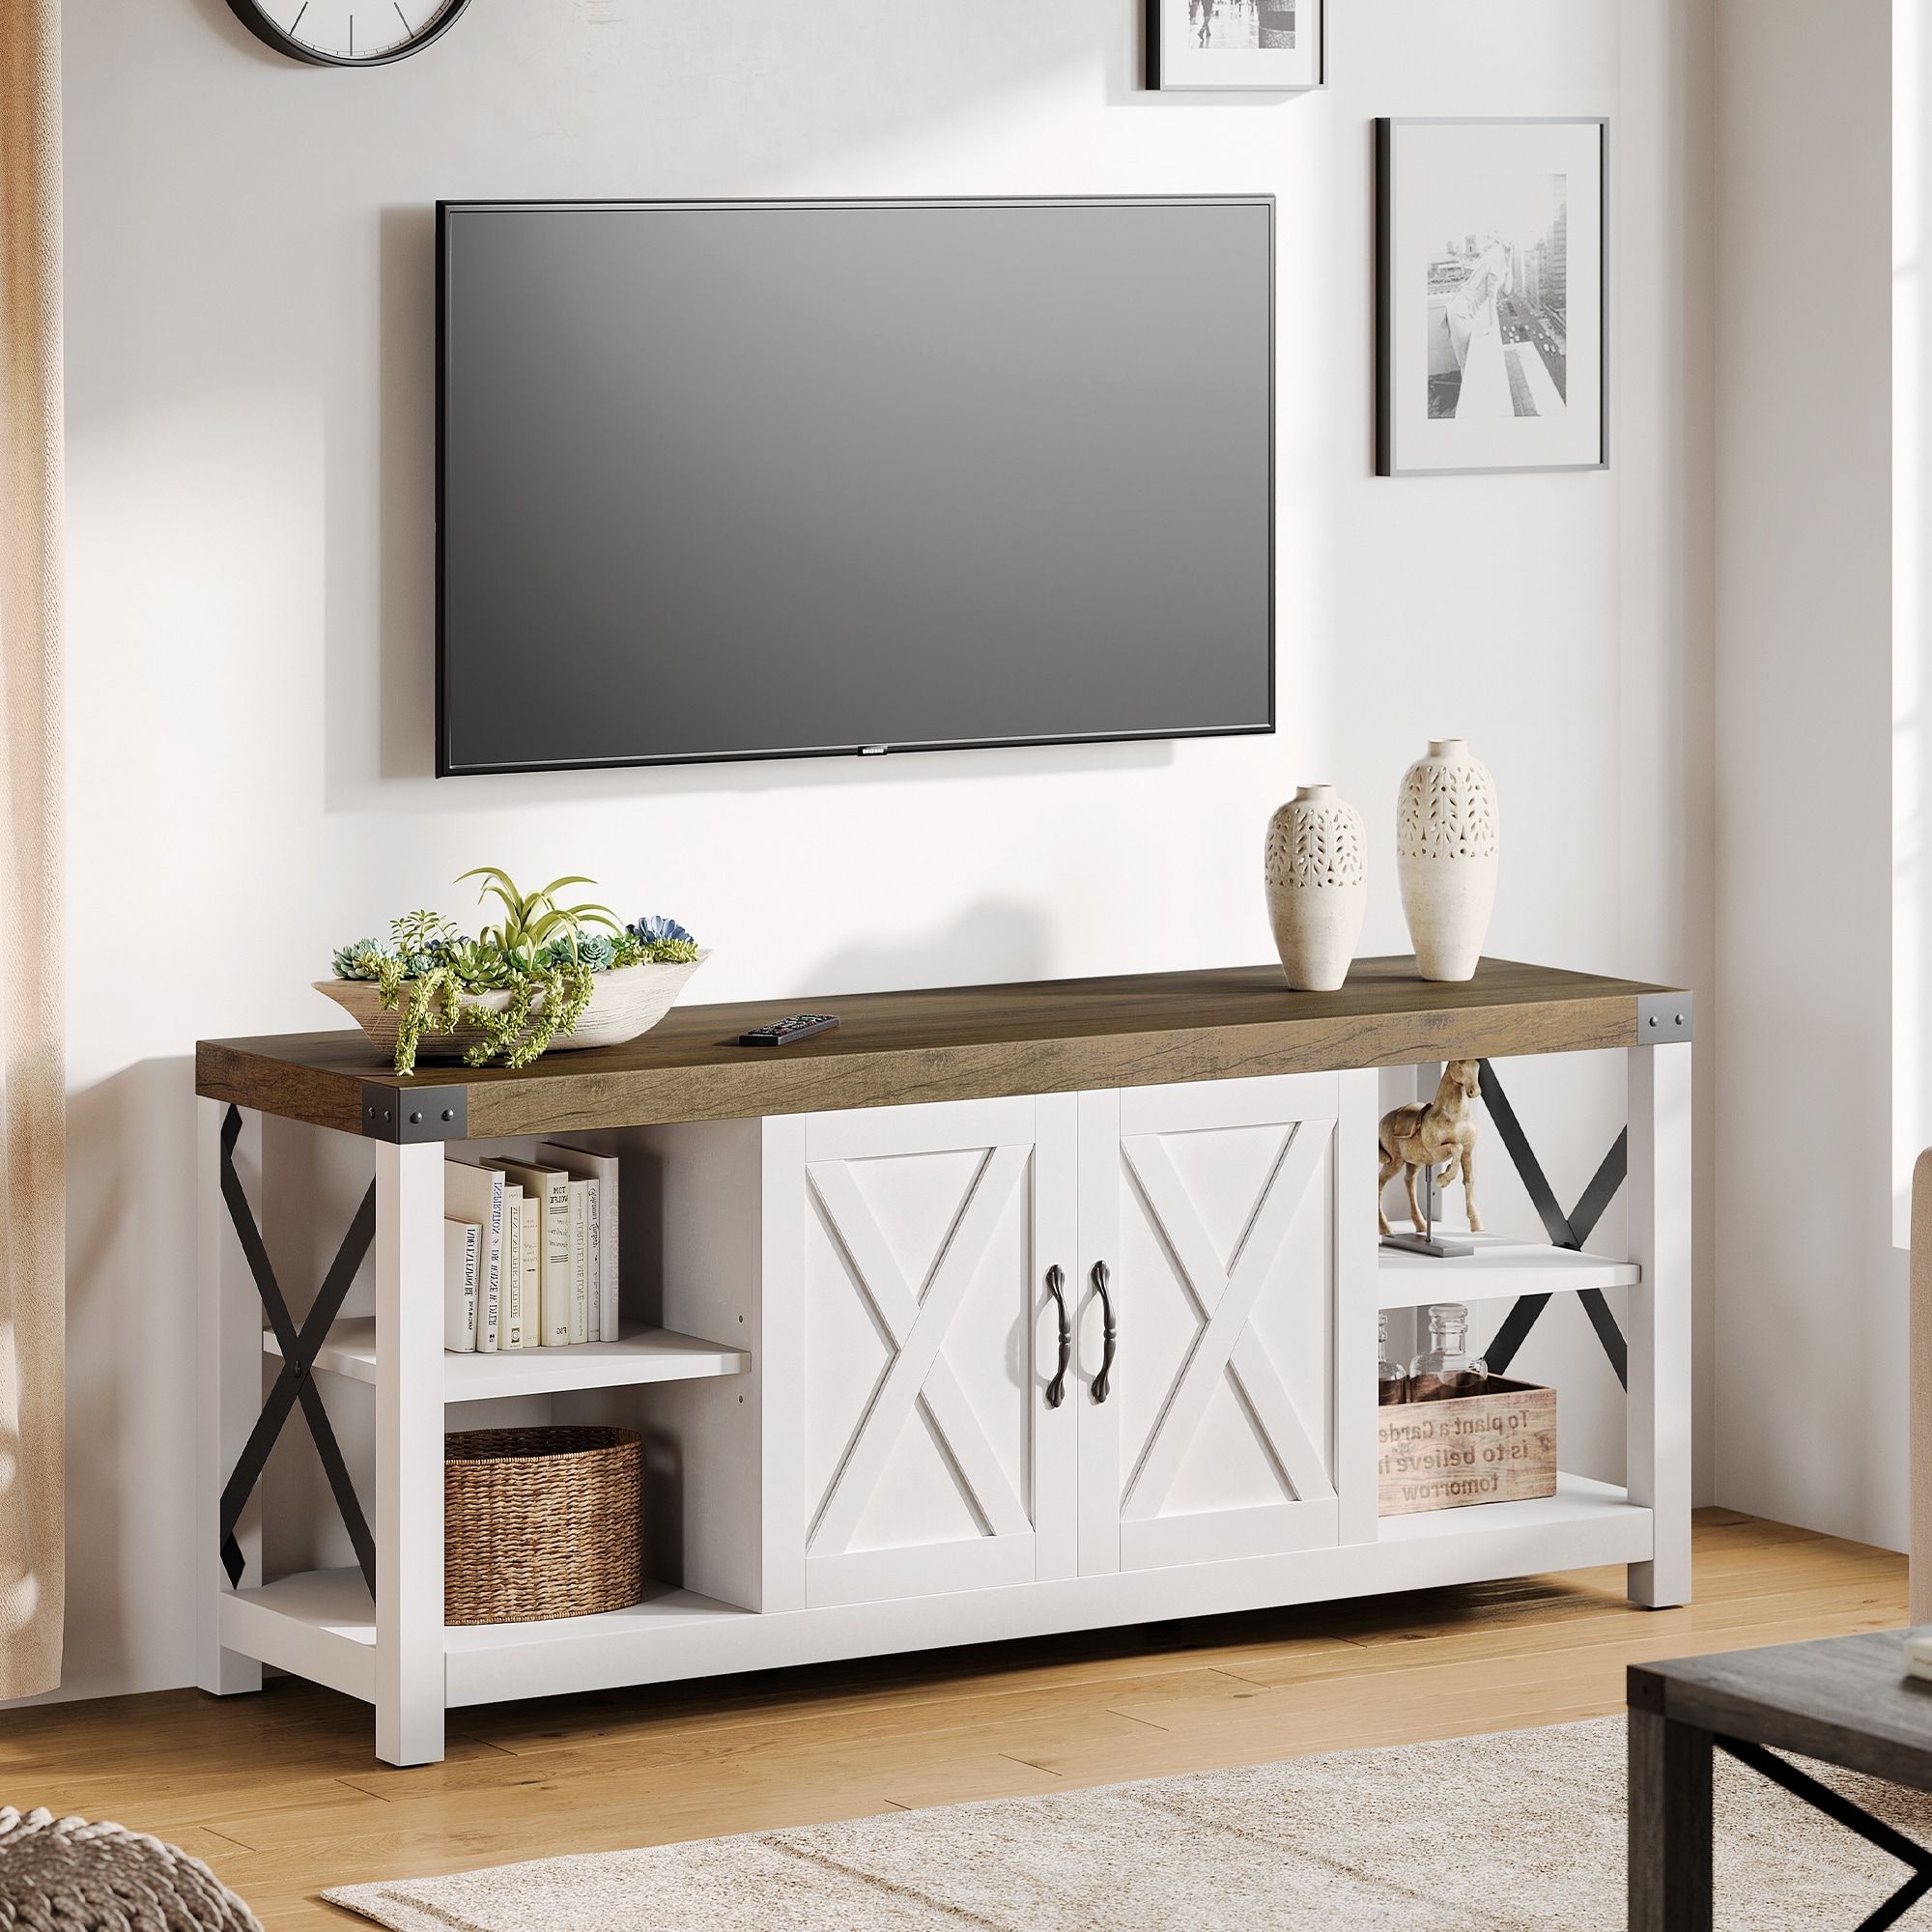 59 Inch Tv Stand For Tv Up To 50 60 65 Inches, Farmhouse Wood Tv Cabinet  Entertainment Center – 59" – On Sale – Bed Bath & Beyond – 36742172 In Farmhouse Stands For Tvs (Gallery 16 of 20)